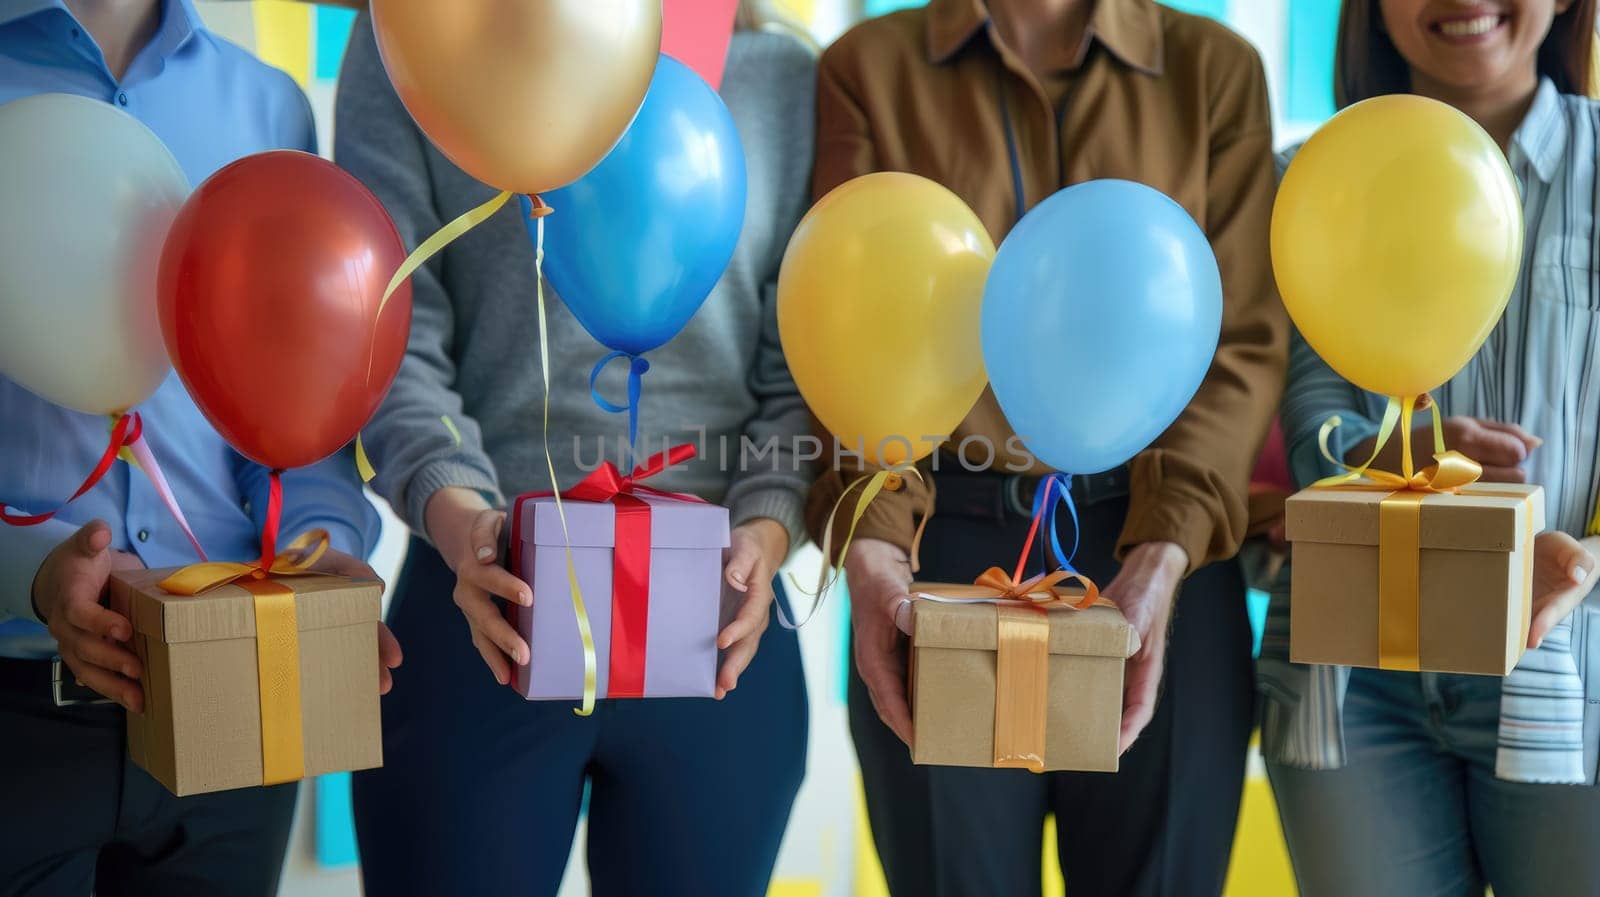 A group of people are holding balloons and presents, Festive and celebratory in office.